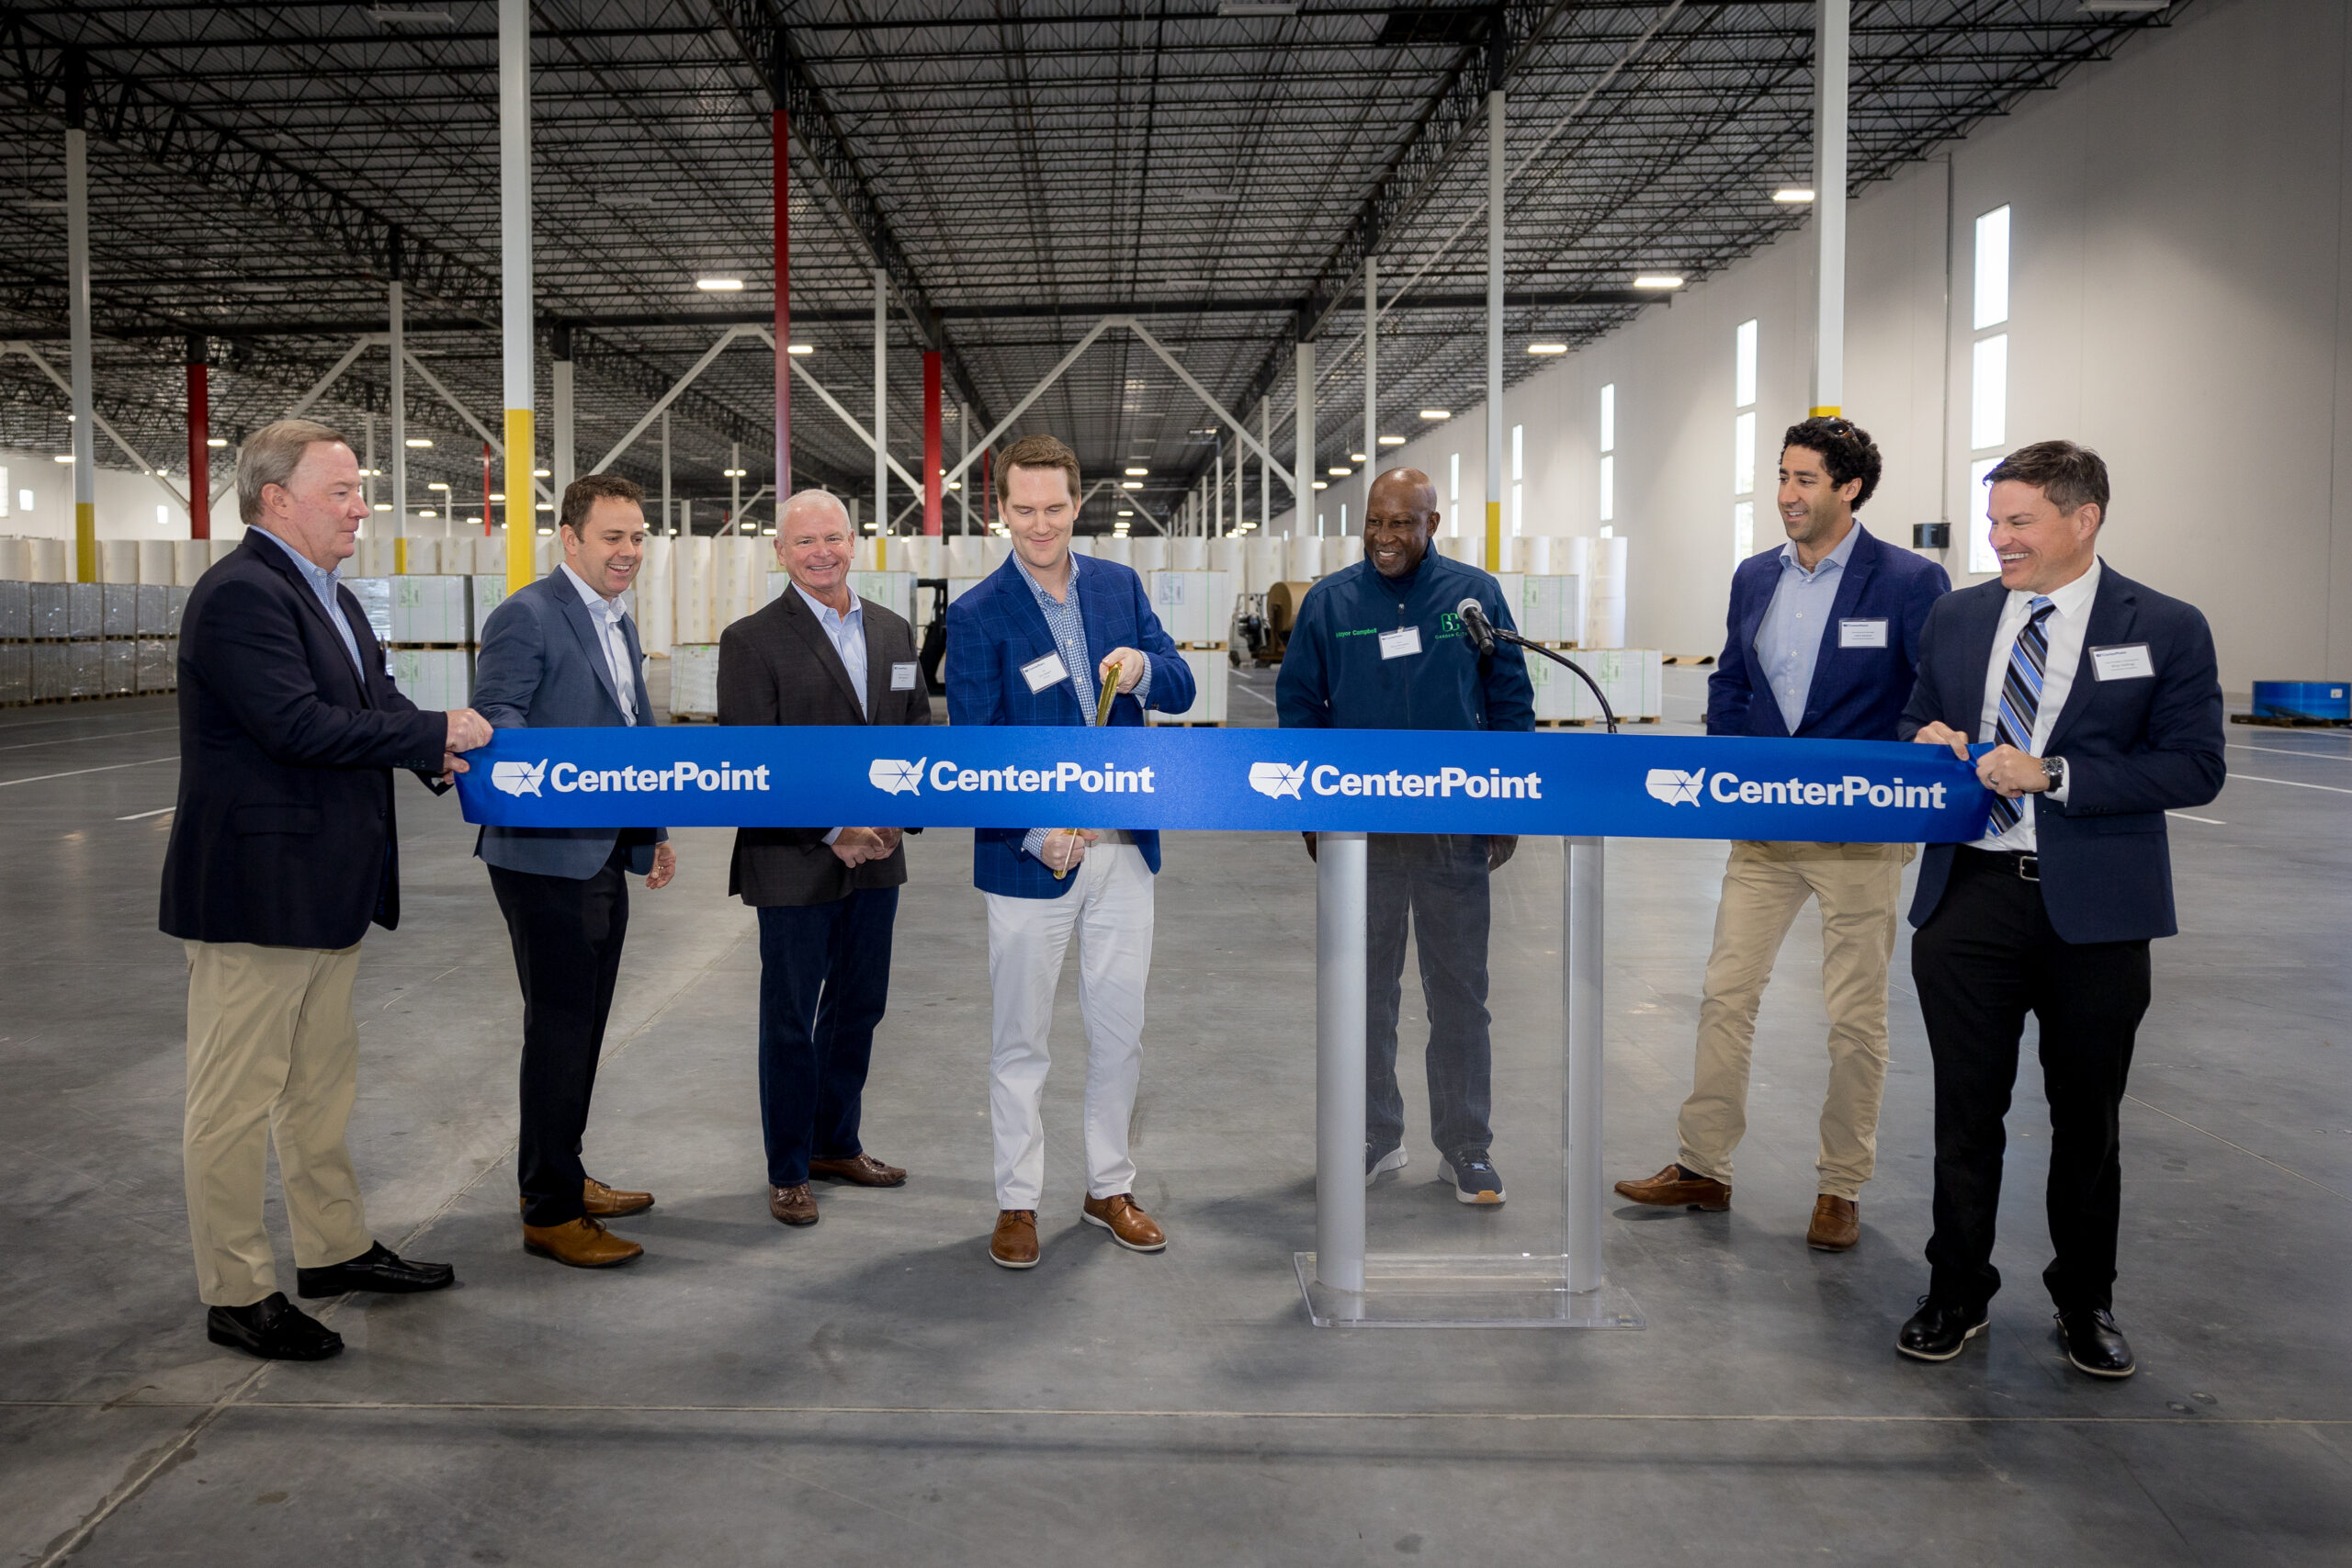 Officials Cut Ribbon on CenterPoint’s State-of-the-Art Industrial Facility Near Port of Savannah Image